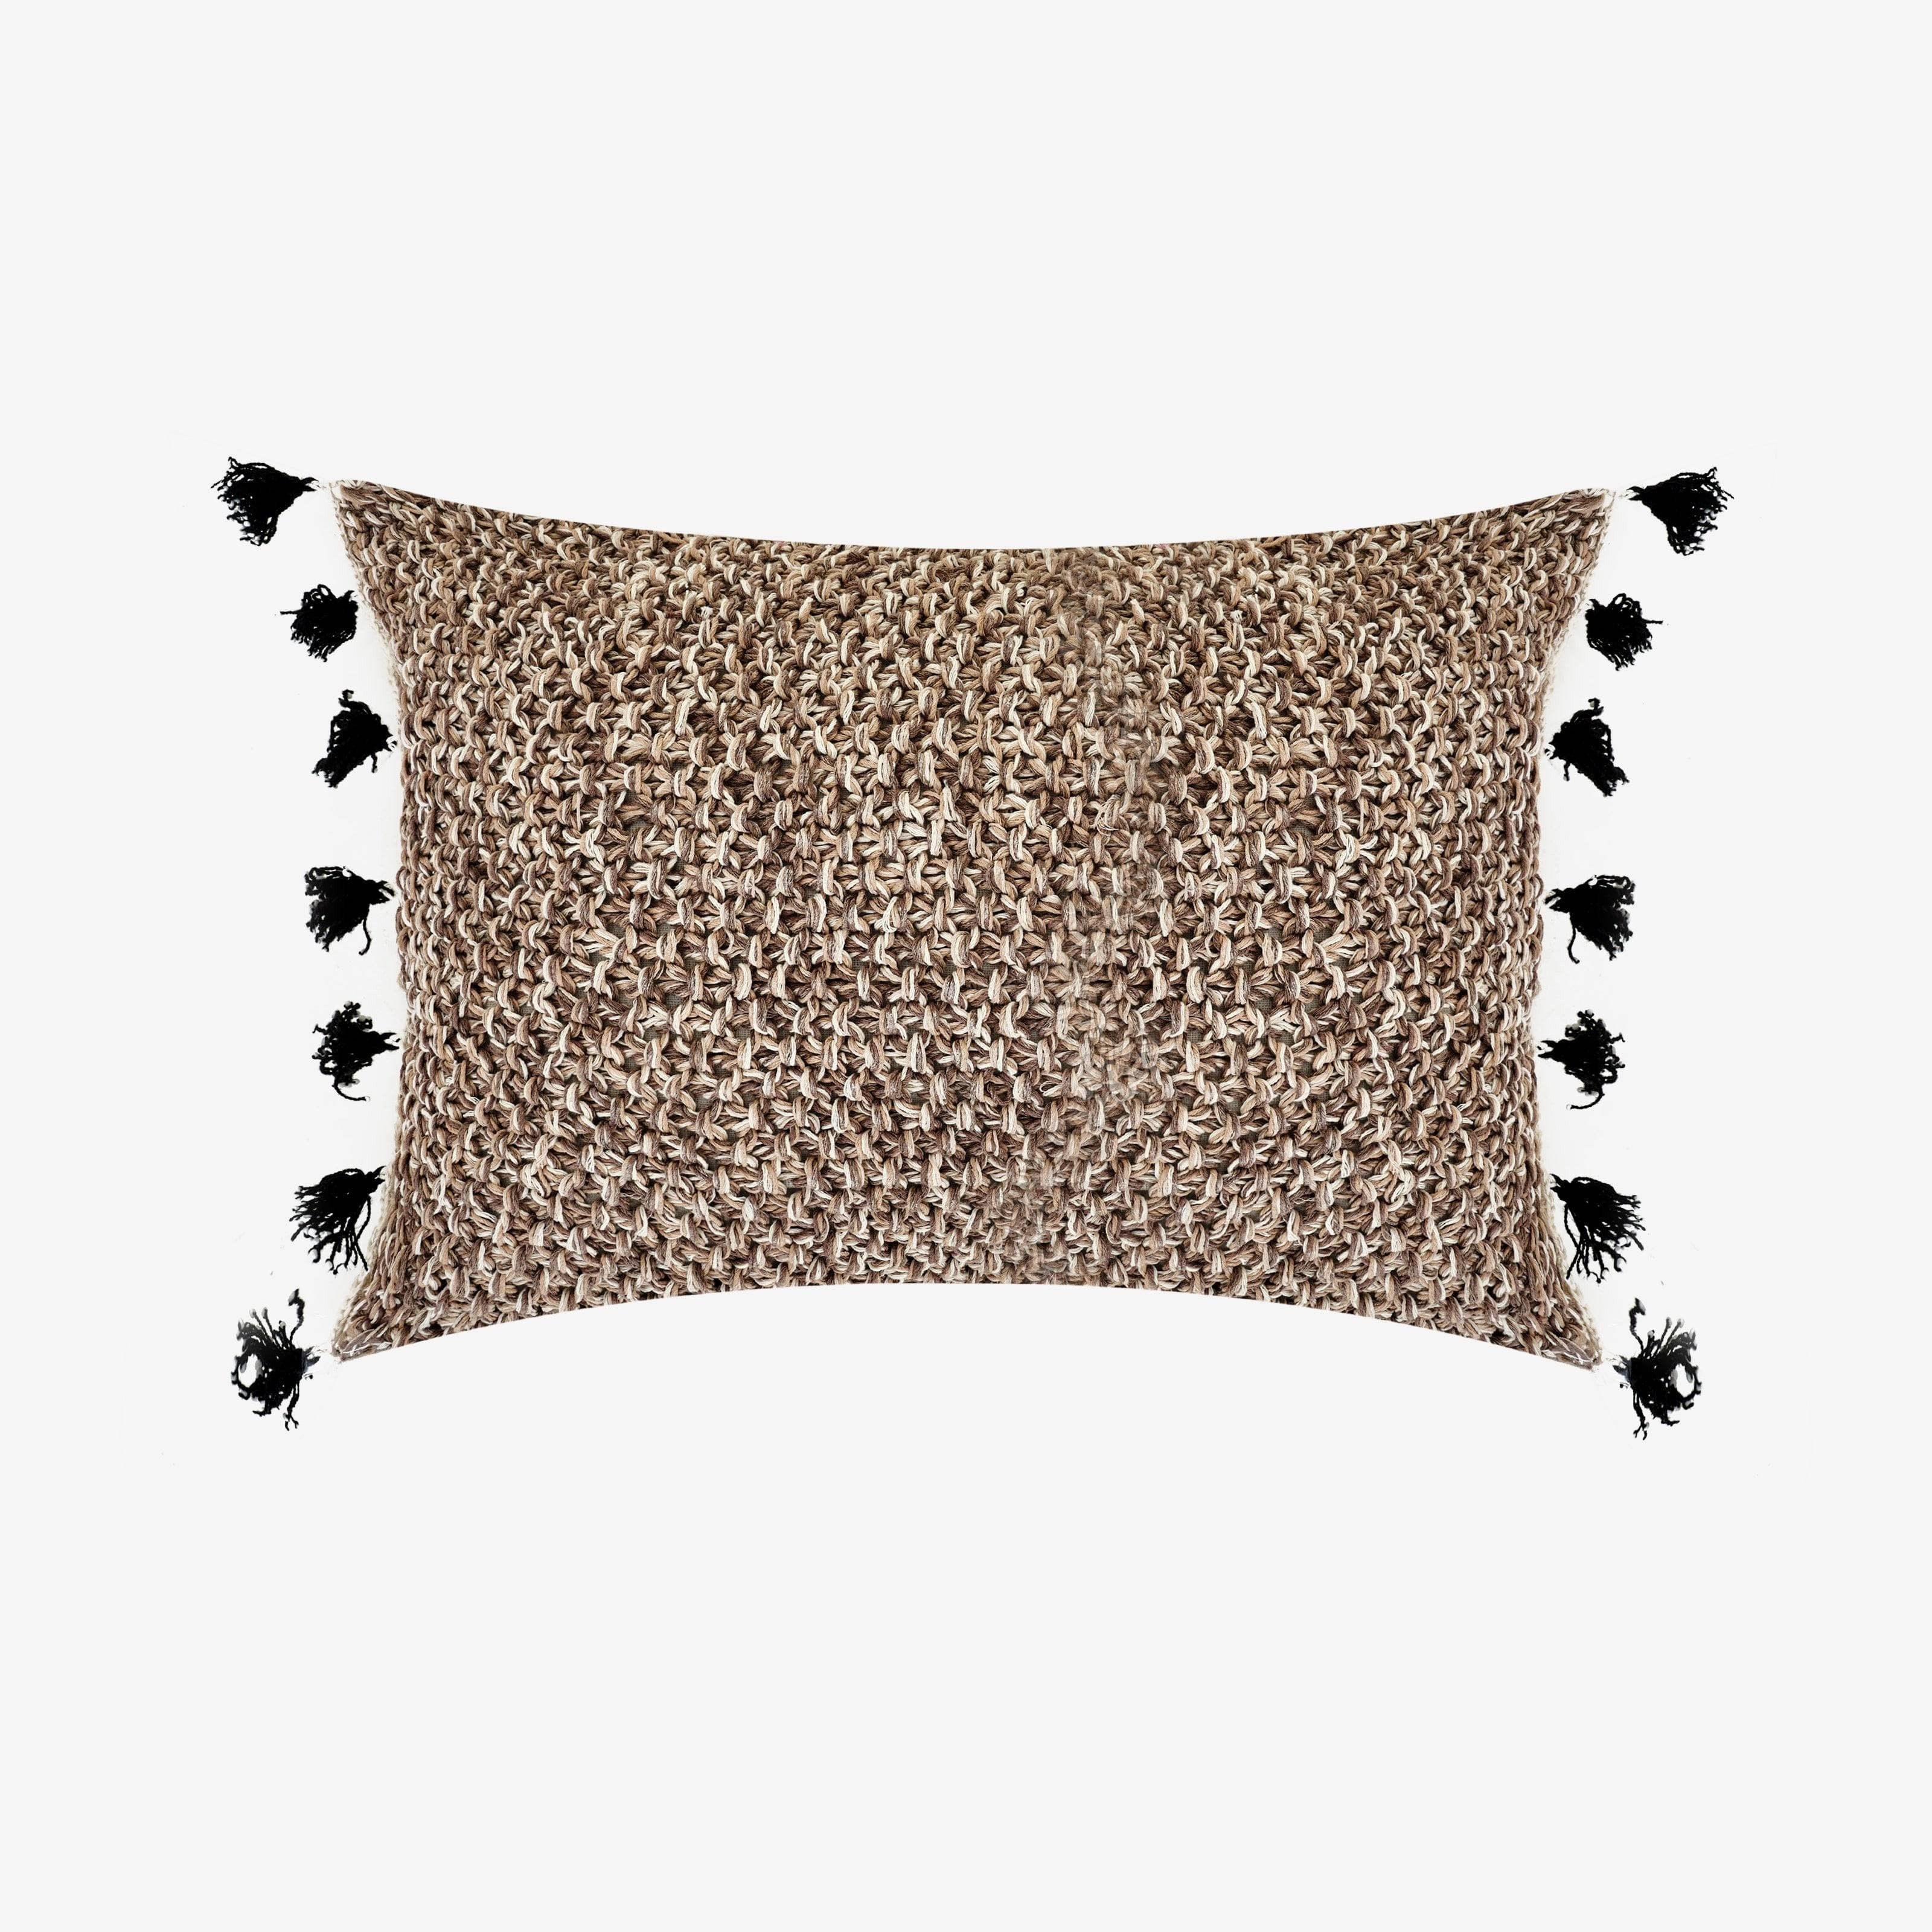 Hurley Cushion Cover, Natural, 45x60 cm